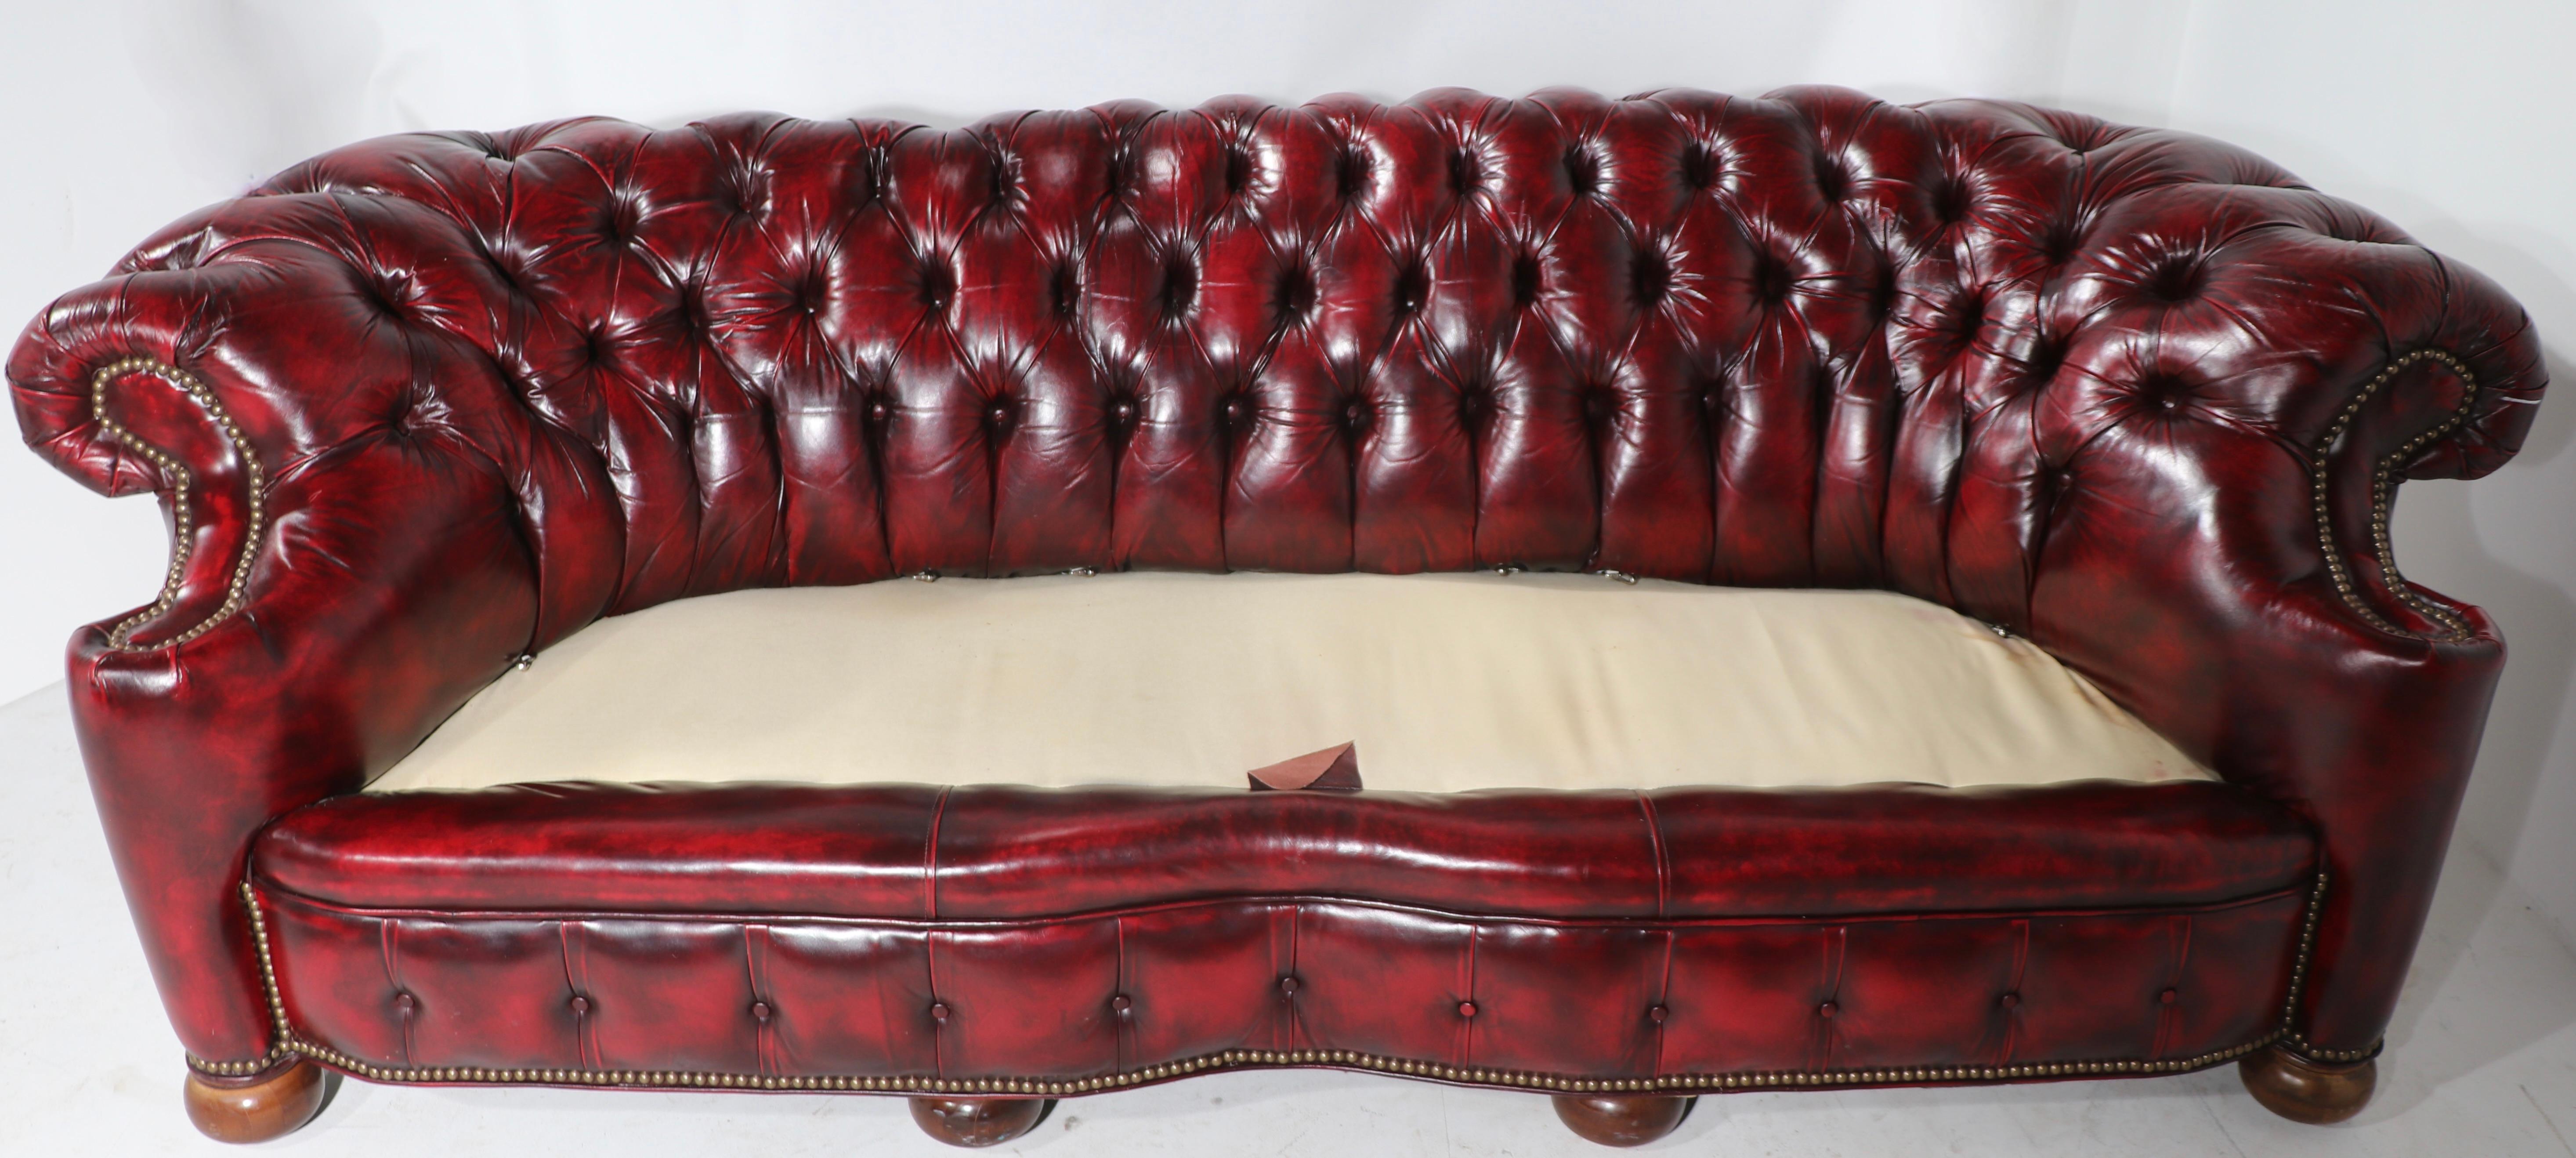 Pr. C Shape Tufted Leather Chesterfield Sofas 6